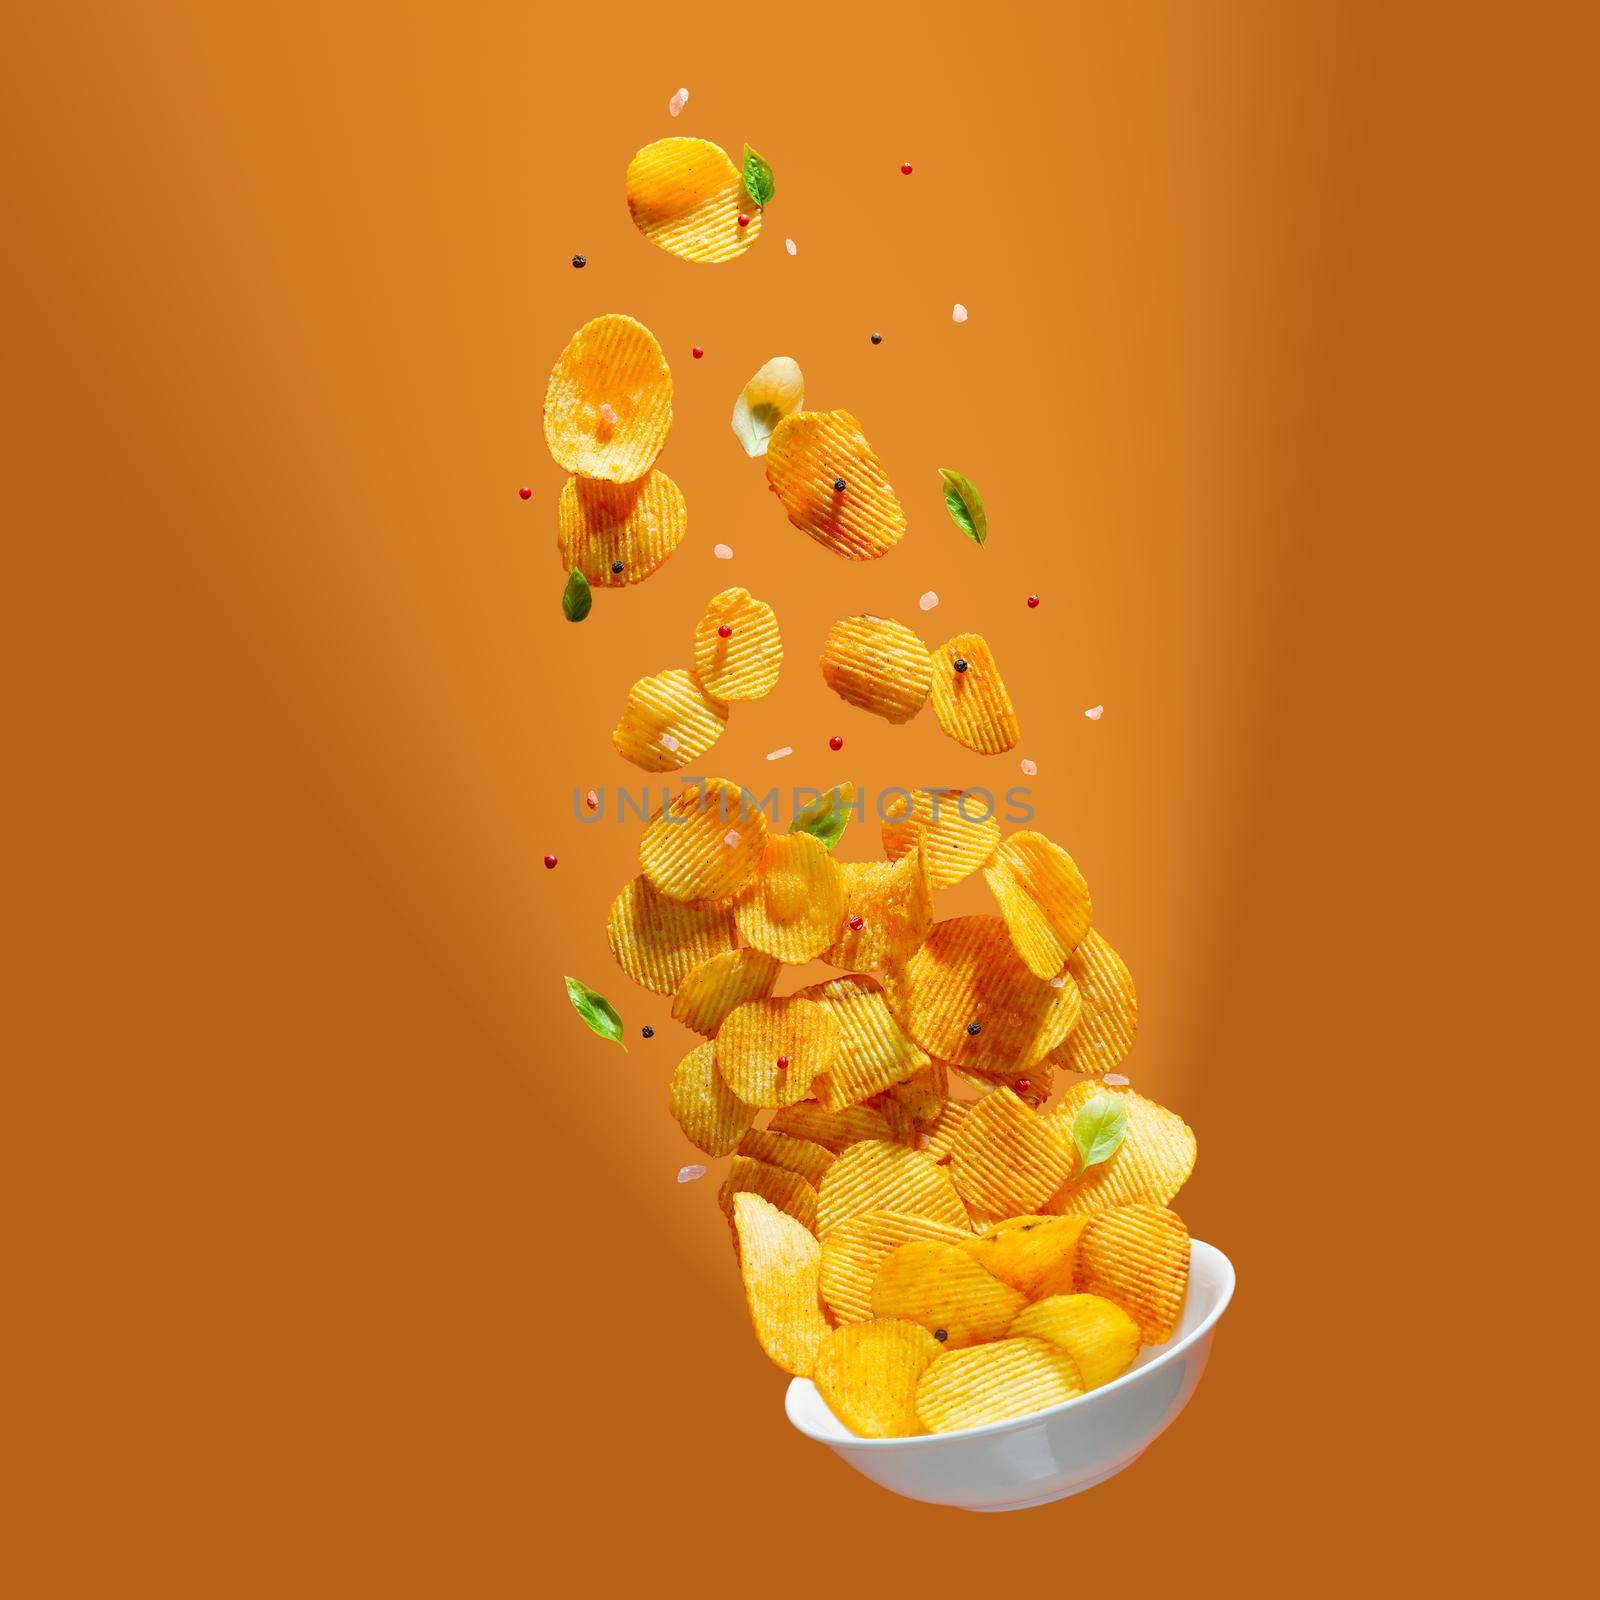 Potato chips falling onto plate on white background. Advertising concept. Levitation flying chips by PhotoTime